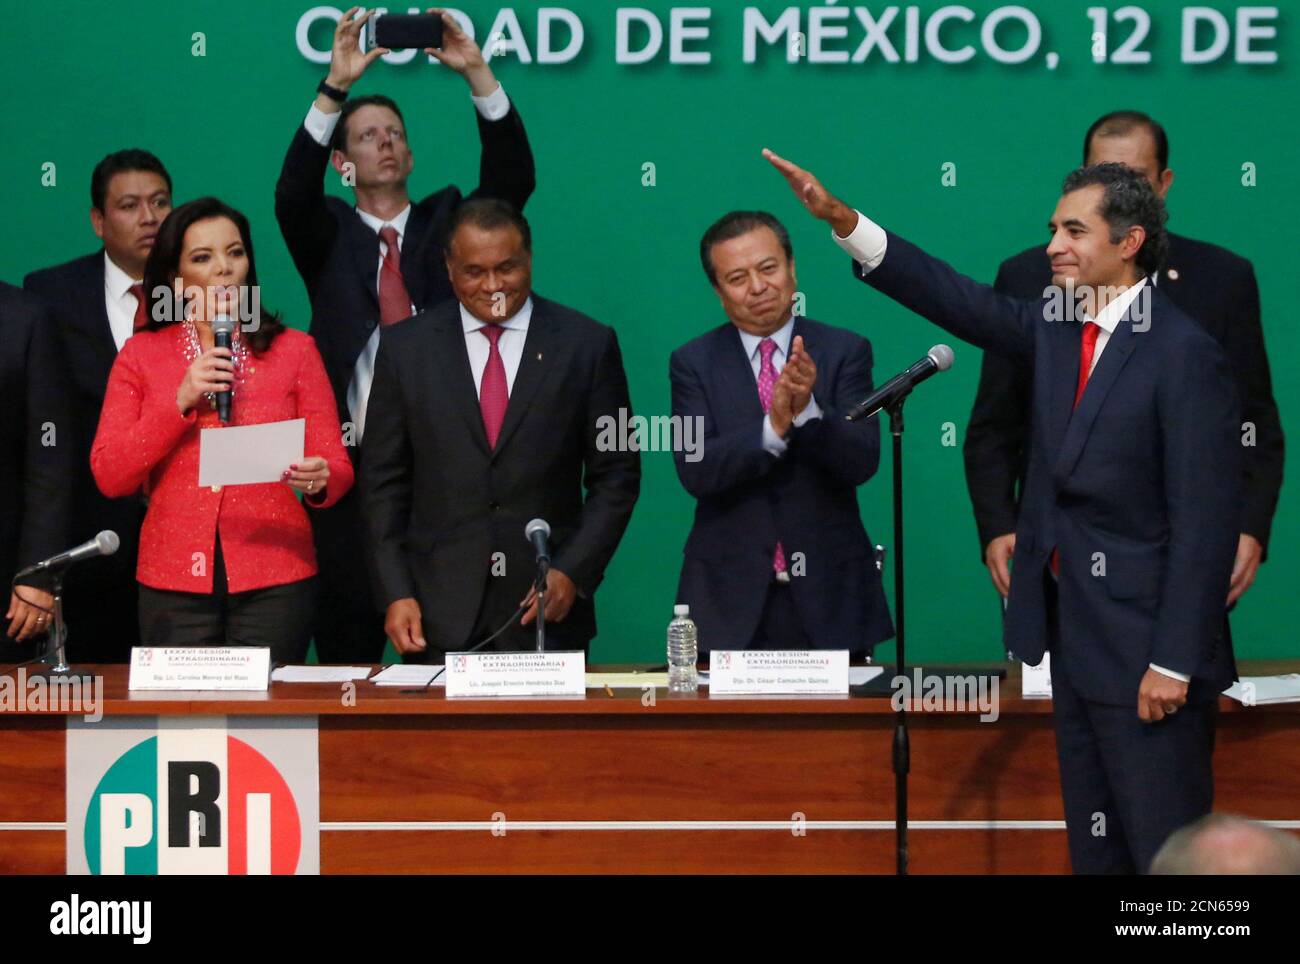 Enrique Ochoa takes his oath as the new chairman of the Institutional Revolutionary Party (PRI) during the XXXVI Special Session of the National Political Council of the Party, at PRI headquarters, in Mexico City, Mexico, July 12, 2016. REUTERS/Edgard Garrido Stock Photo